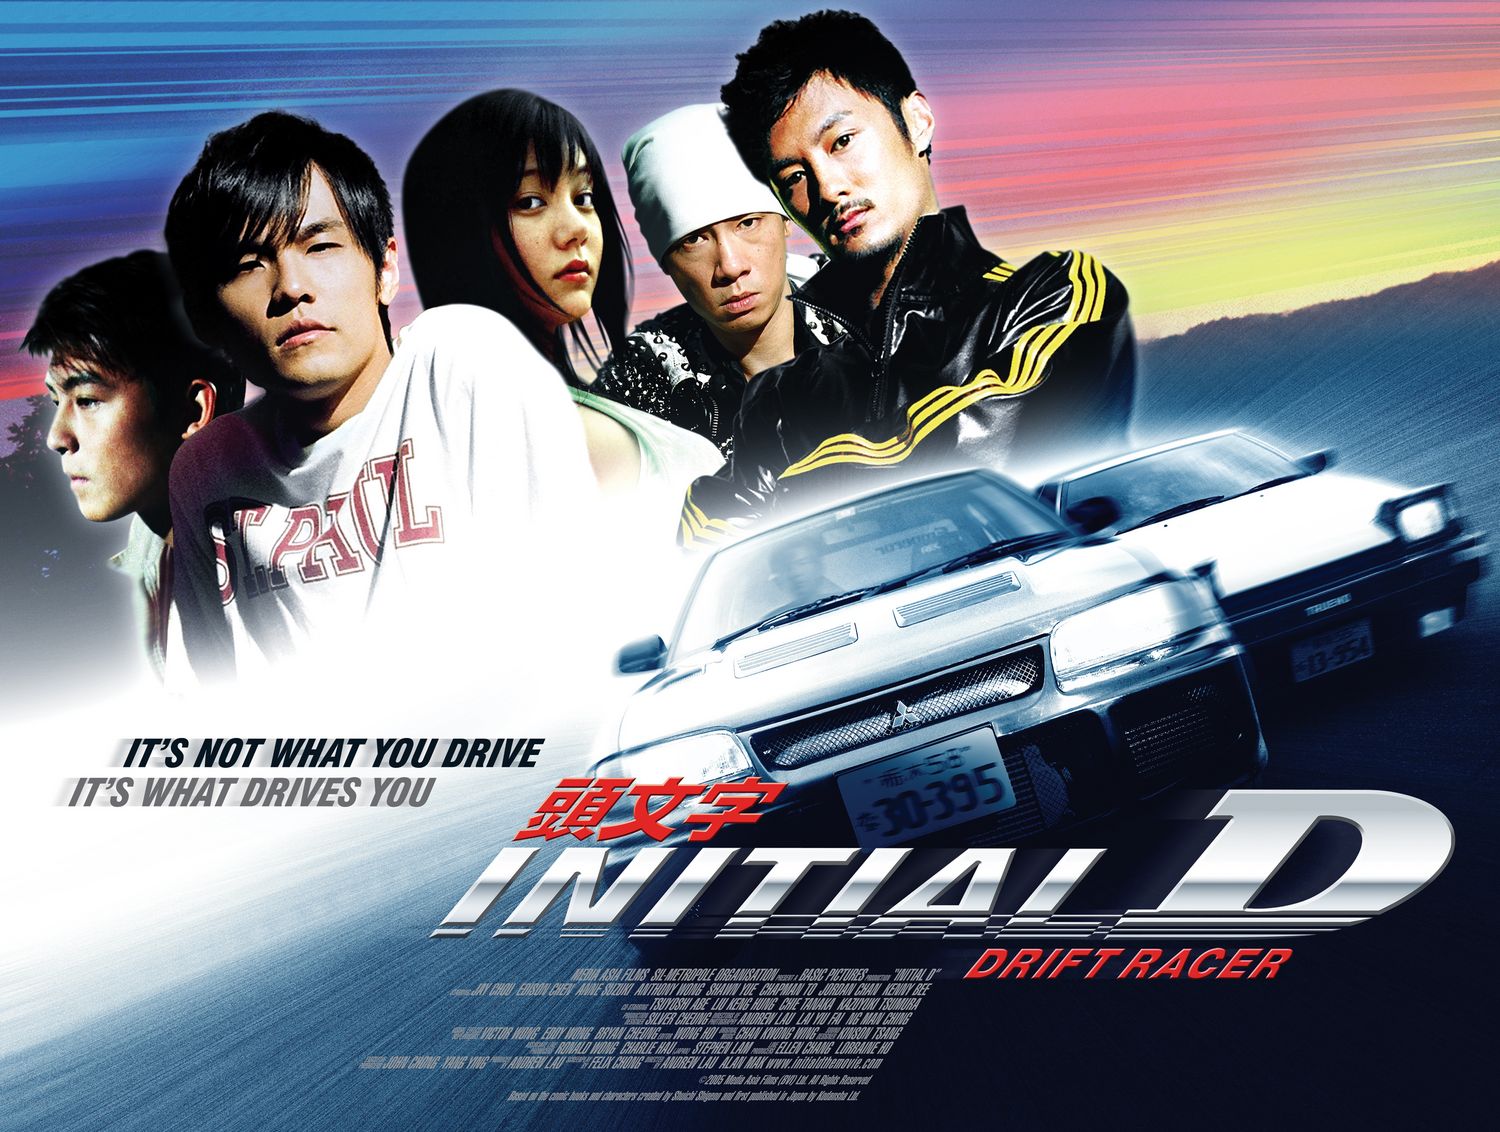 Extra Large Movie Poster Image for Initial D - Drift Racer 